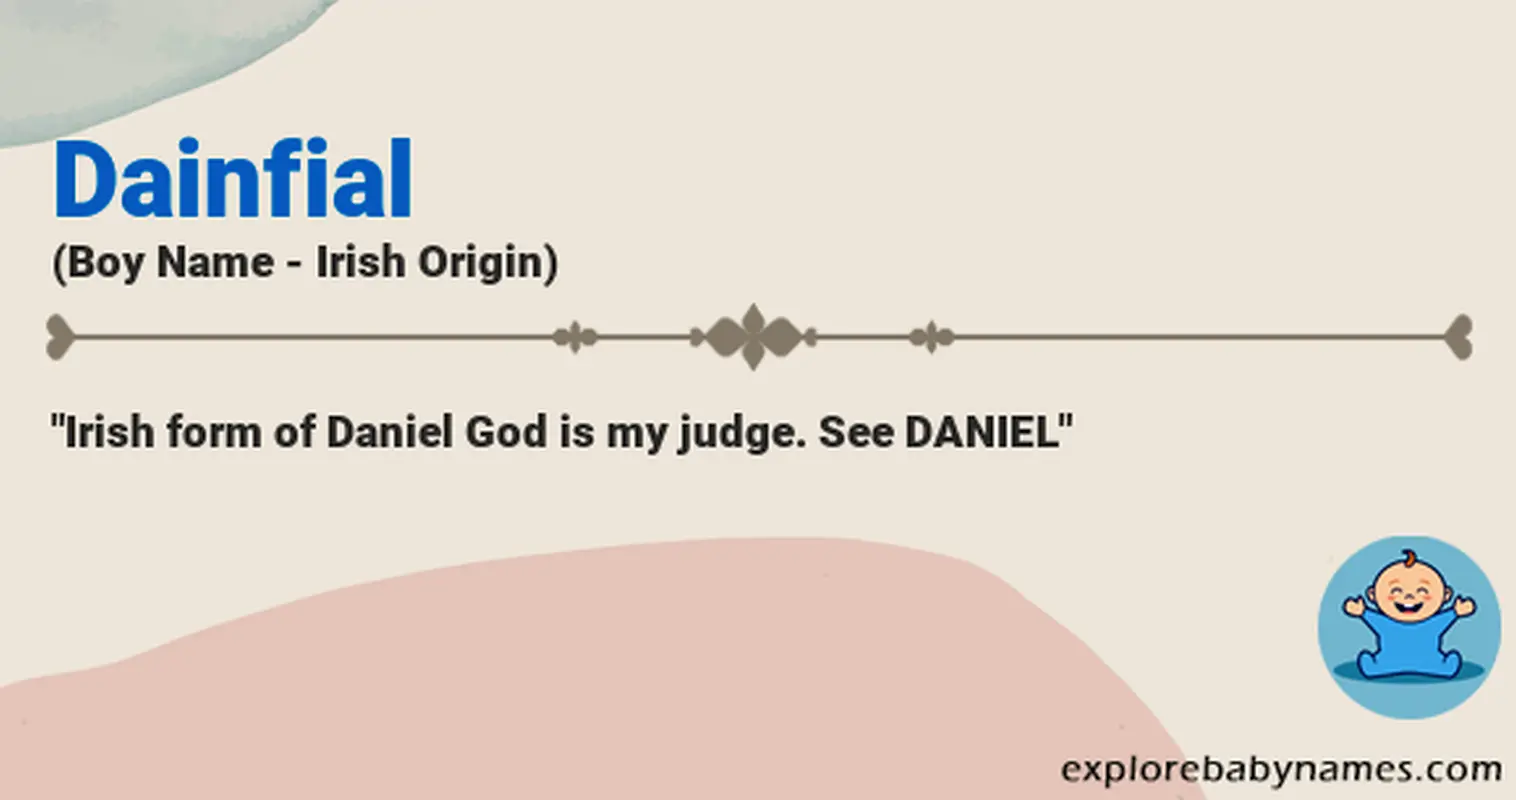 Meaning of Dainfial